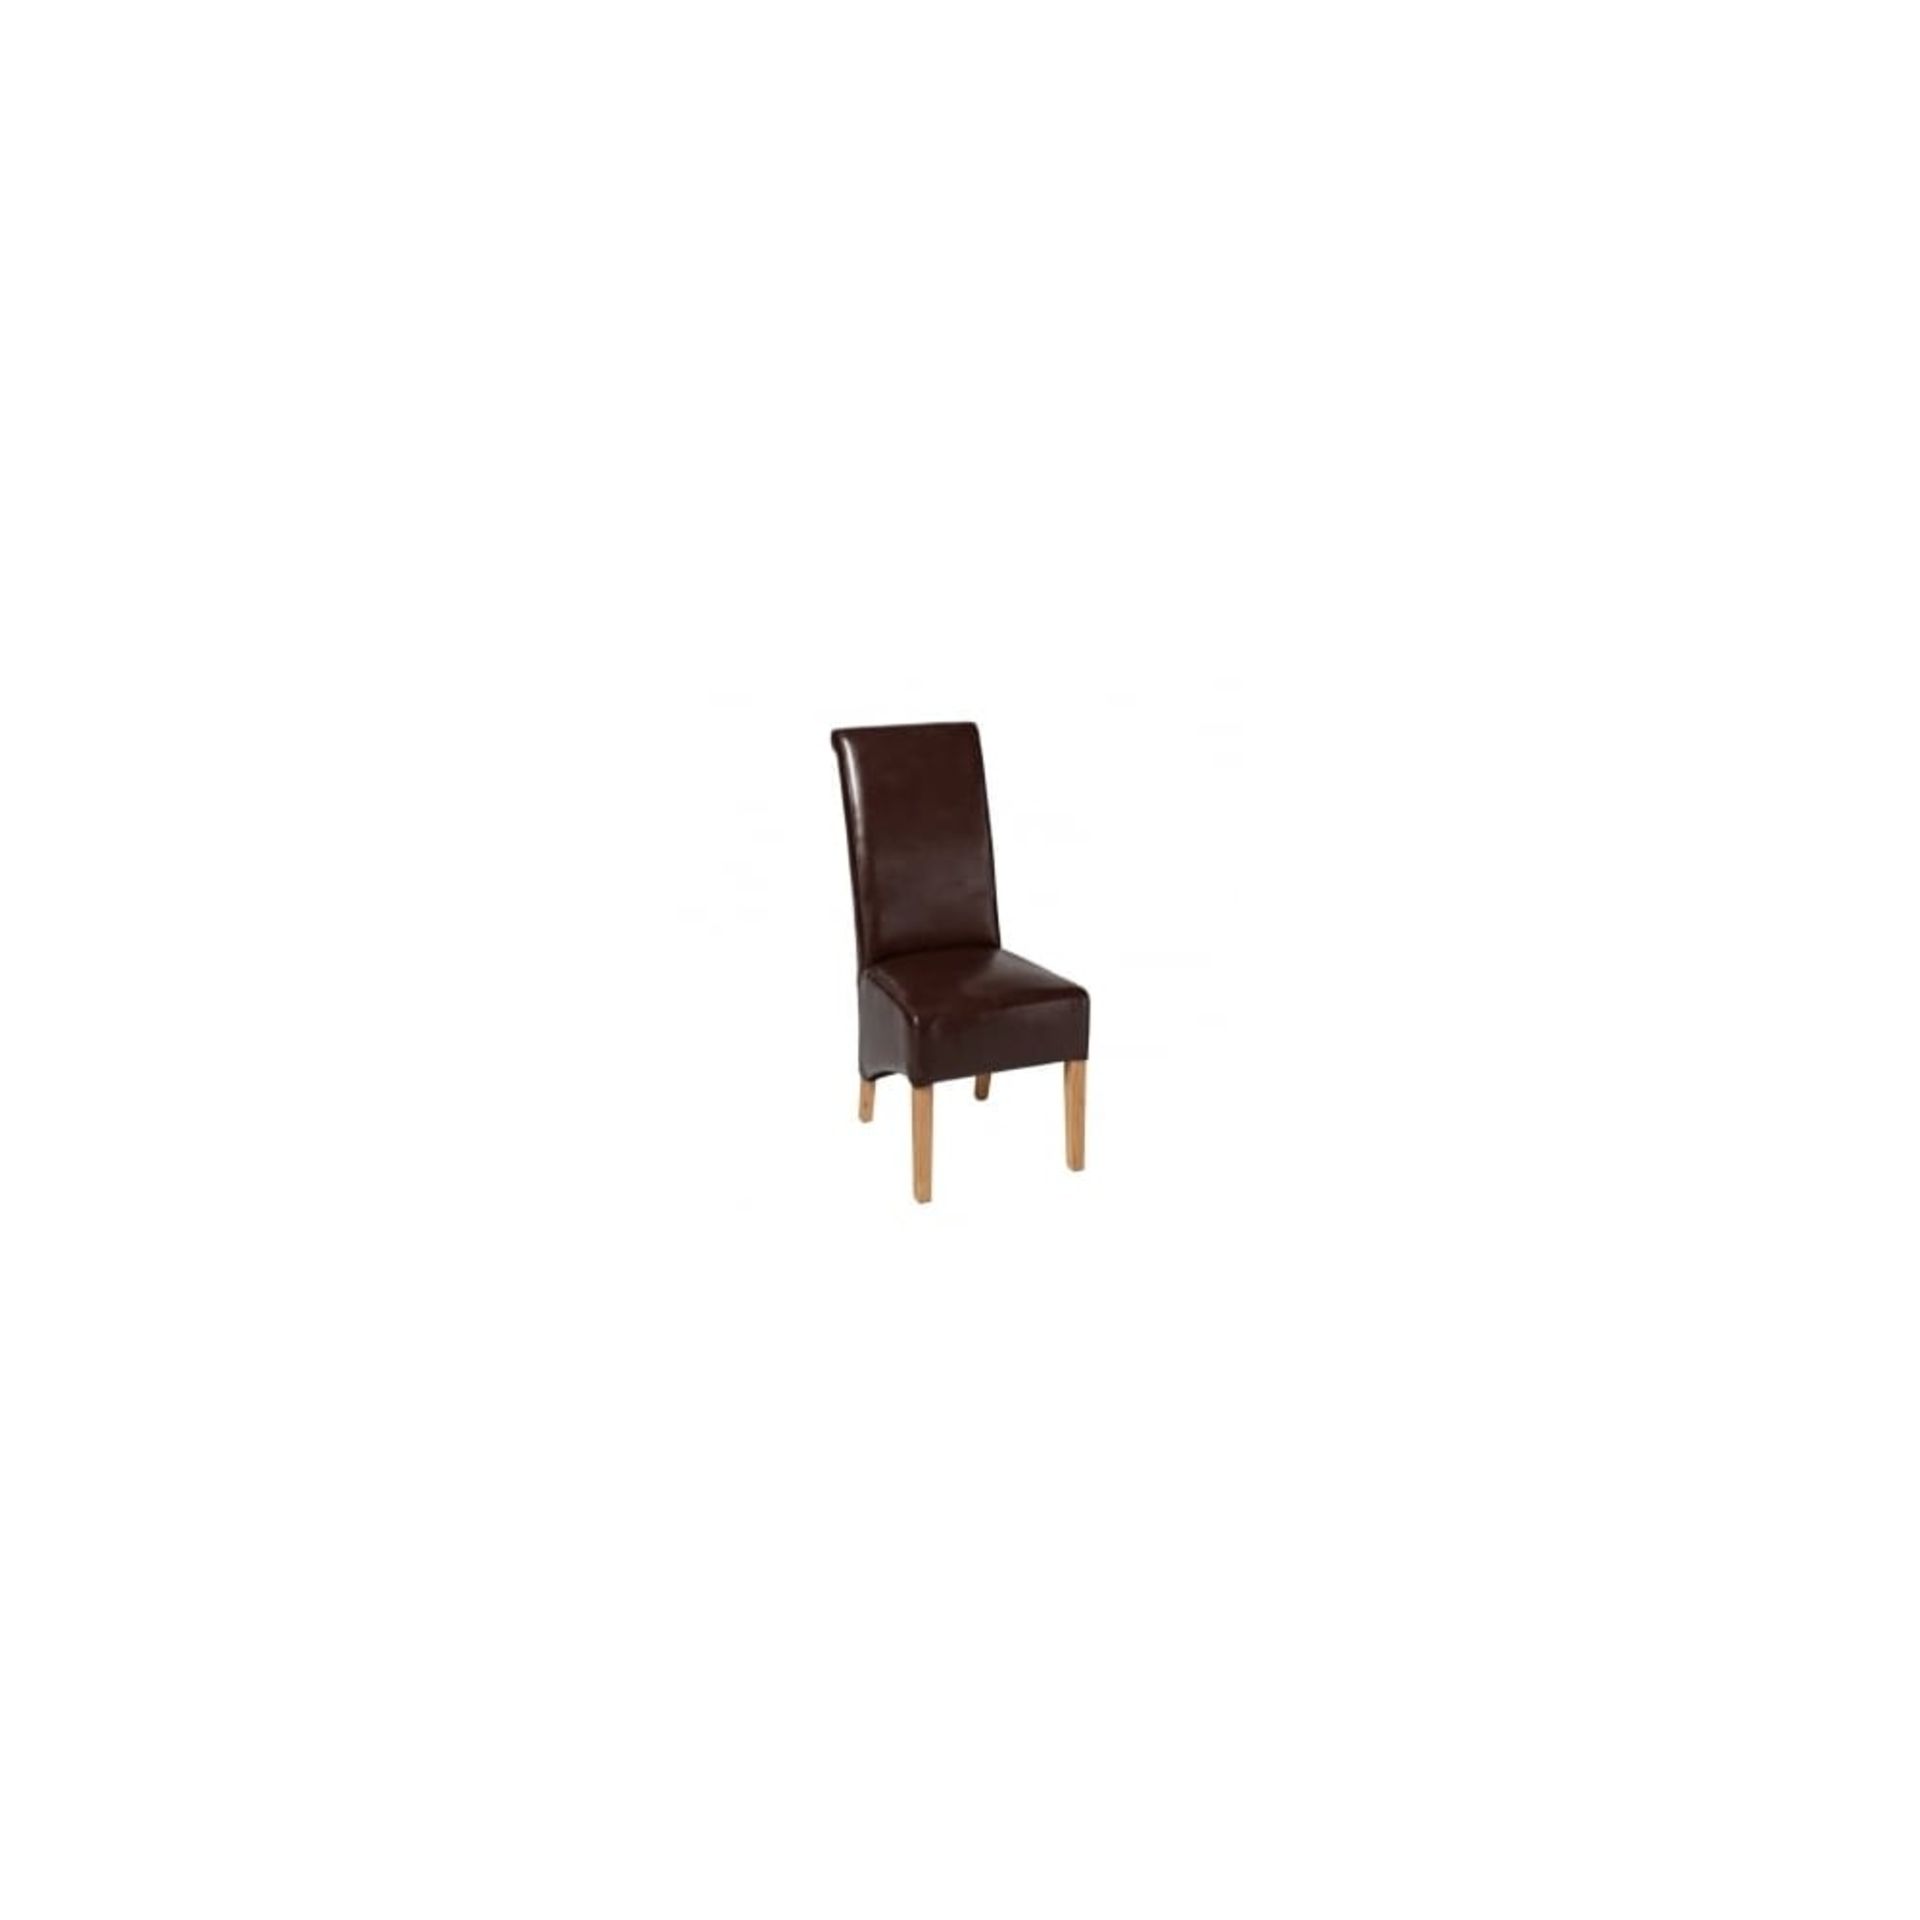 Pair of Cornel Dining Chair Faux Leather (Brown)